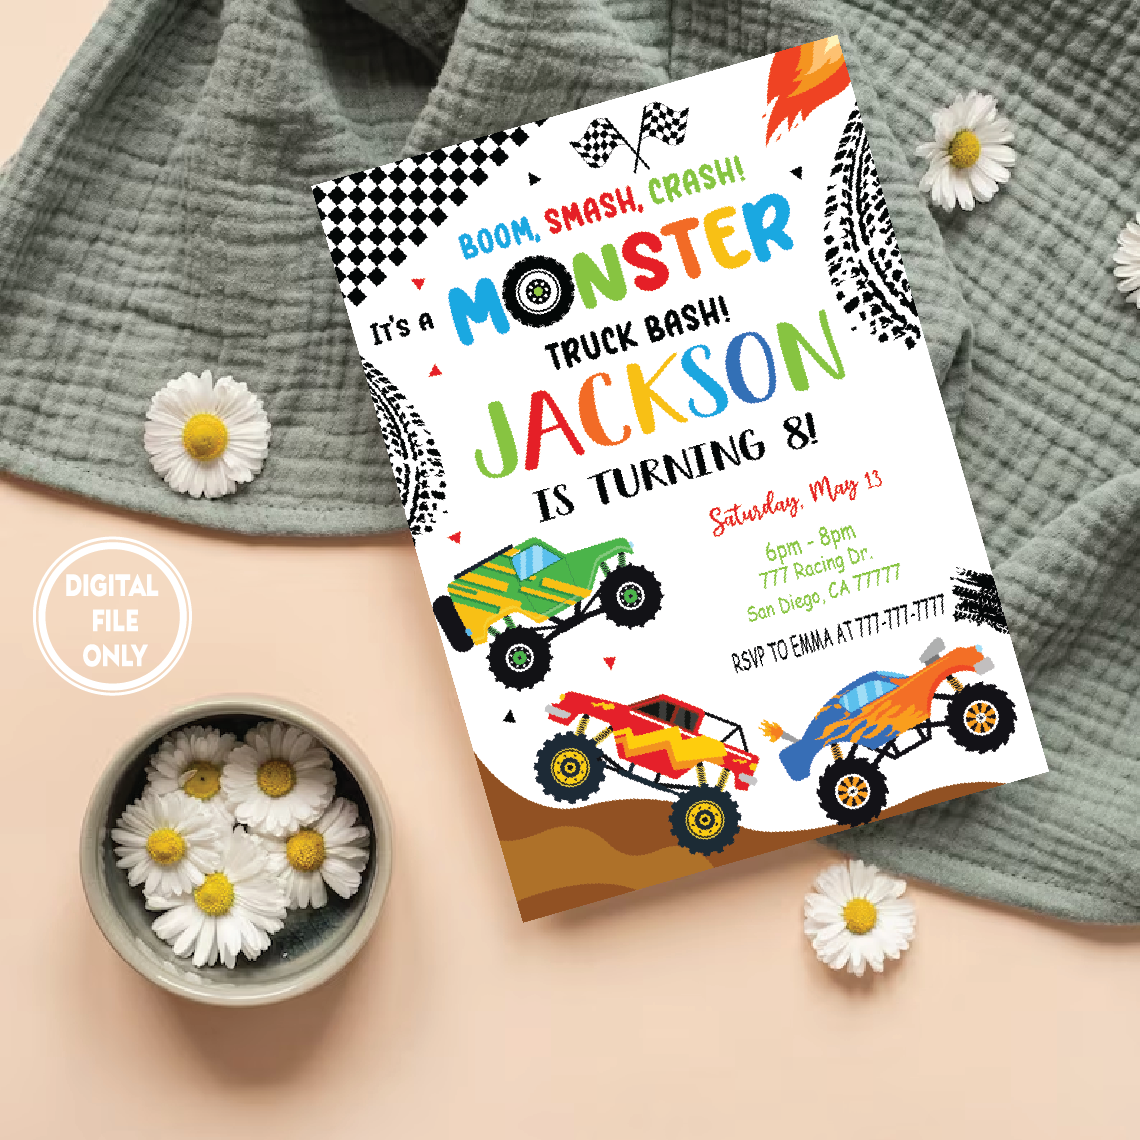 Personalized File Monster Truck Invitation Png, Monster Truck Birthday Invites Png,Instant Download Monster Truck Invitations, PNG File Only